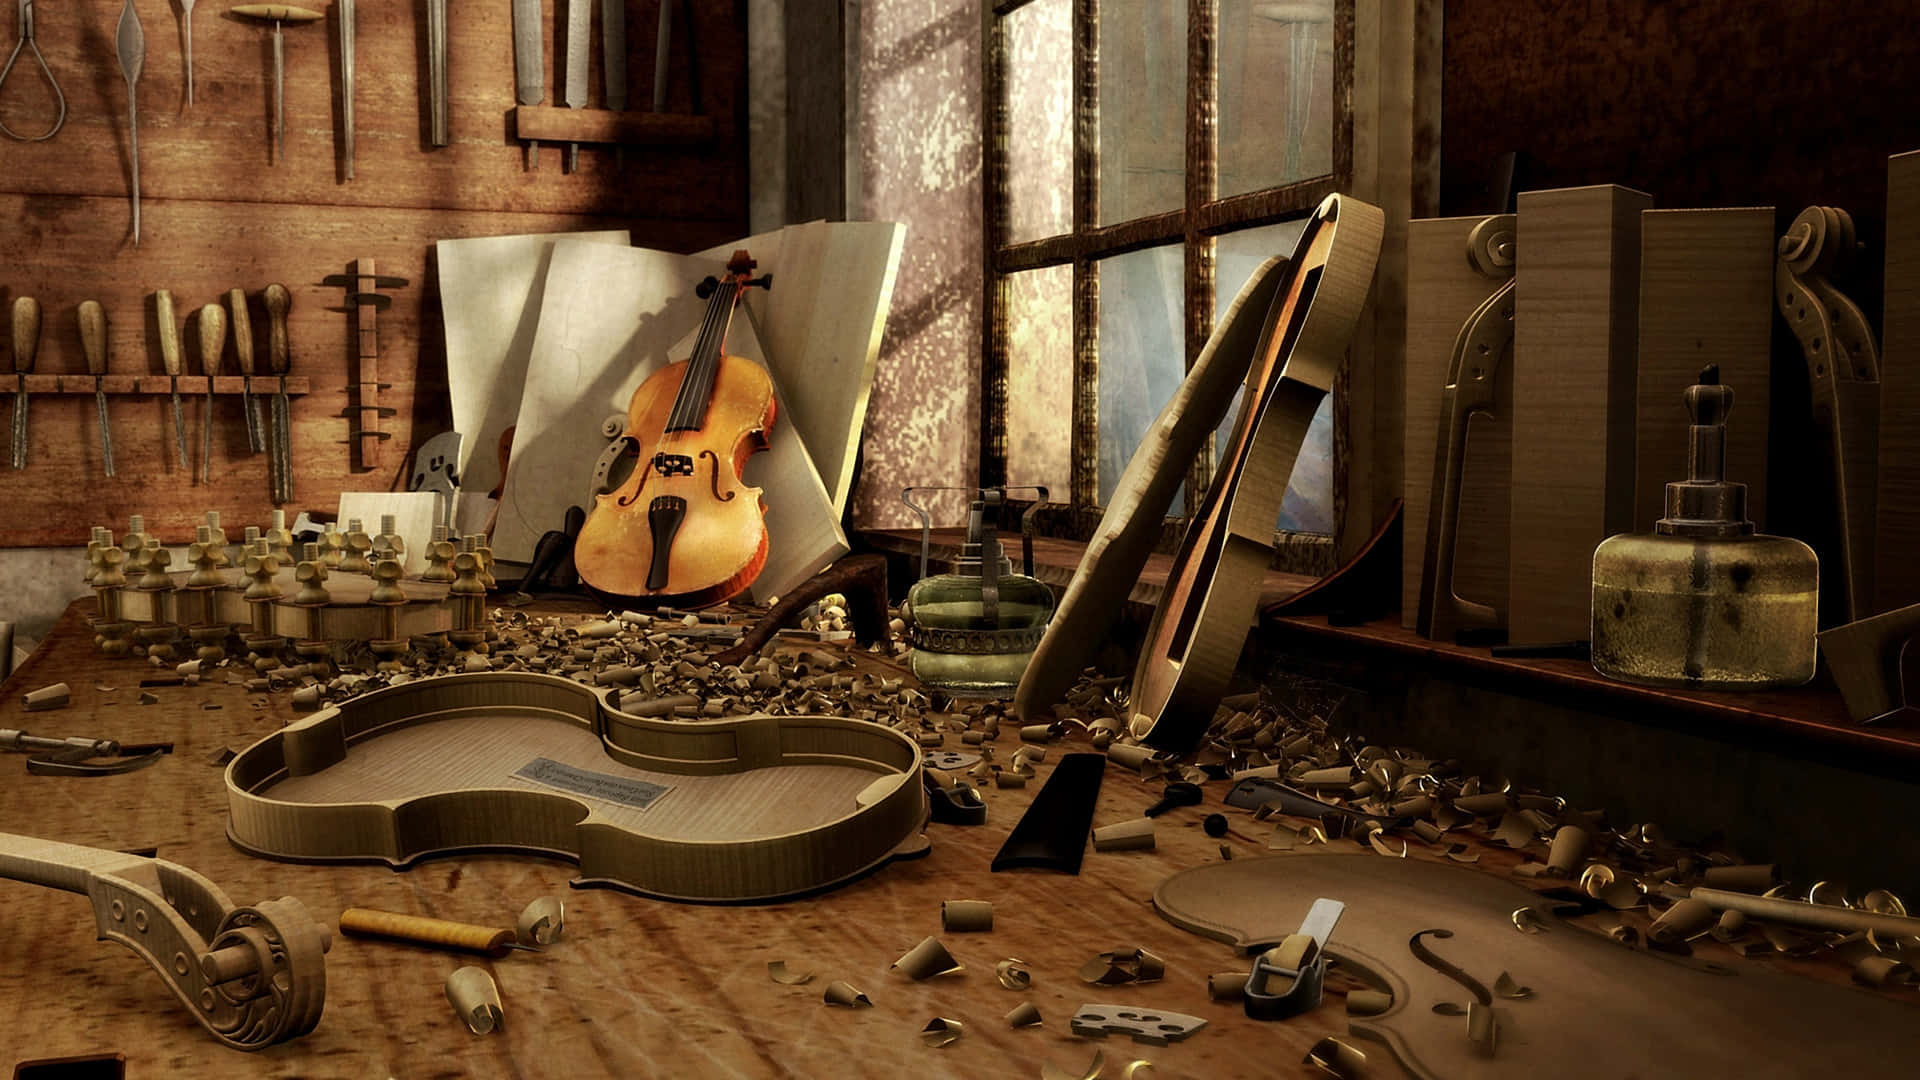 Violin In Abandoned Room Picture